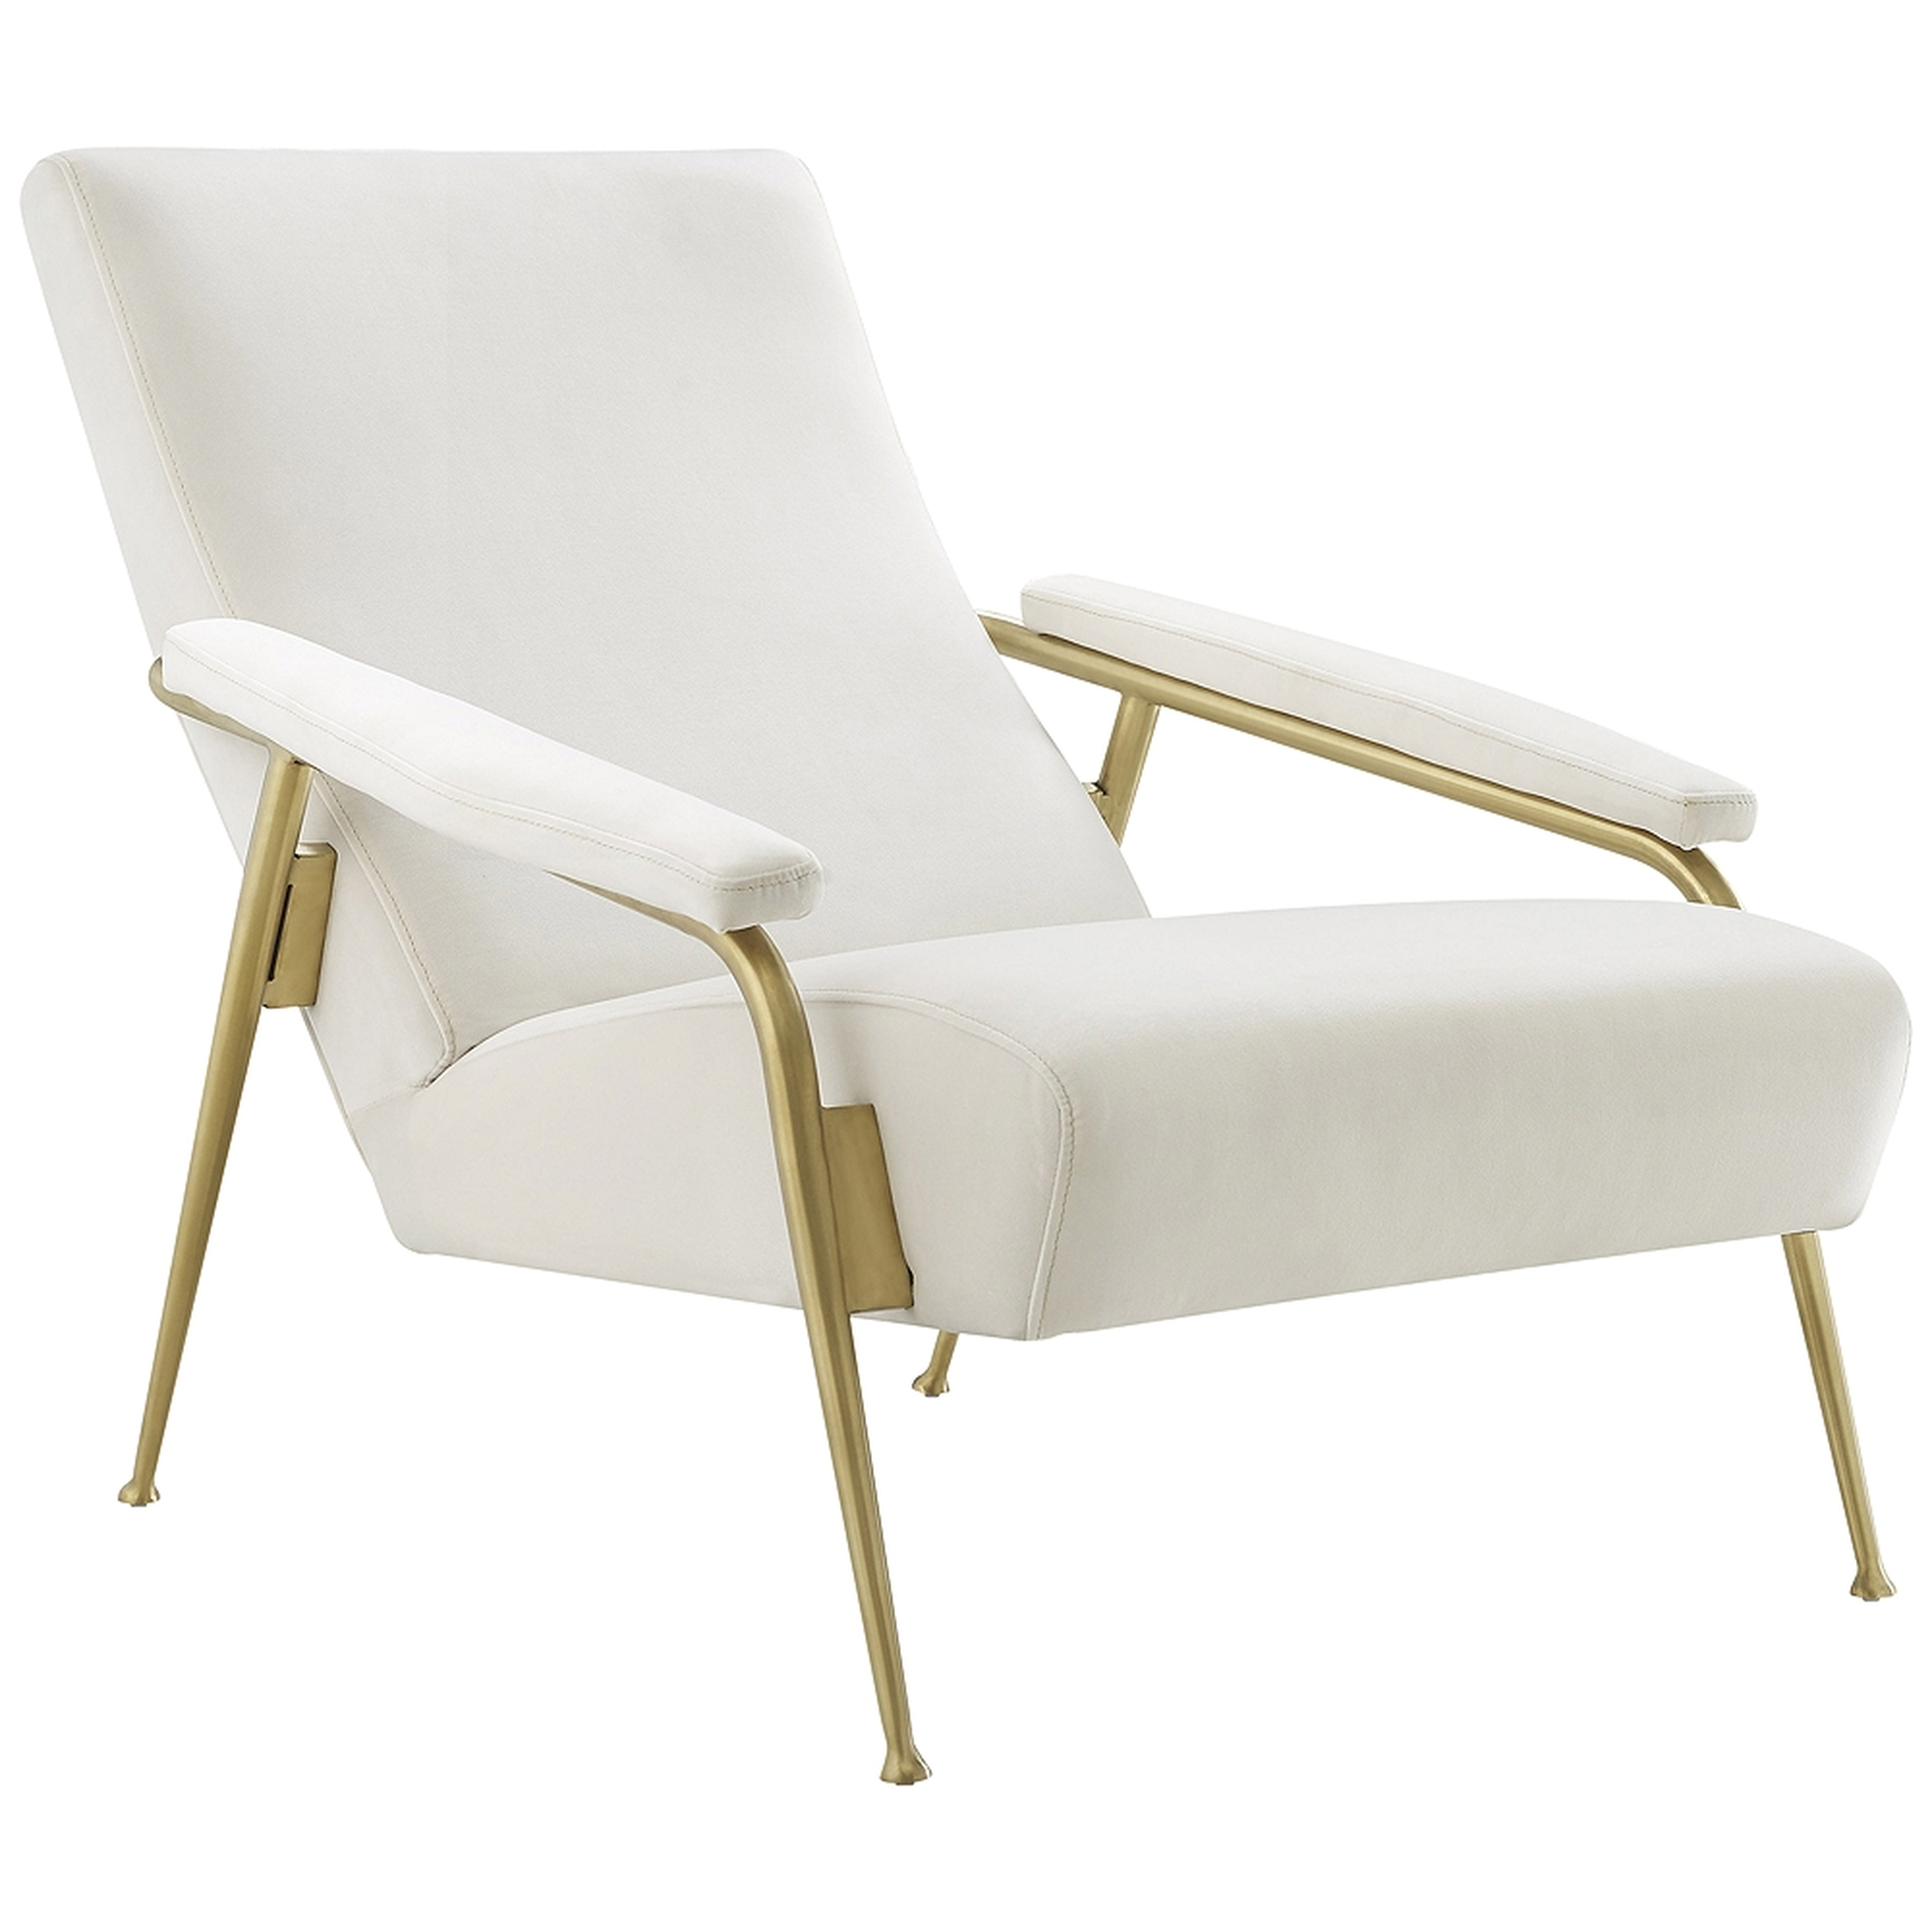 Abbey Cream Velvet and Brushed Gold Armchair - Style # 80N12 - Lamps Plus